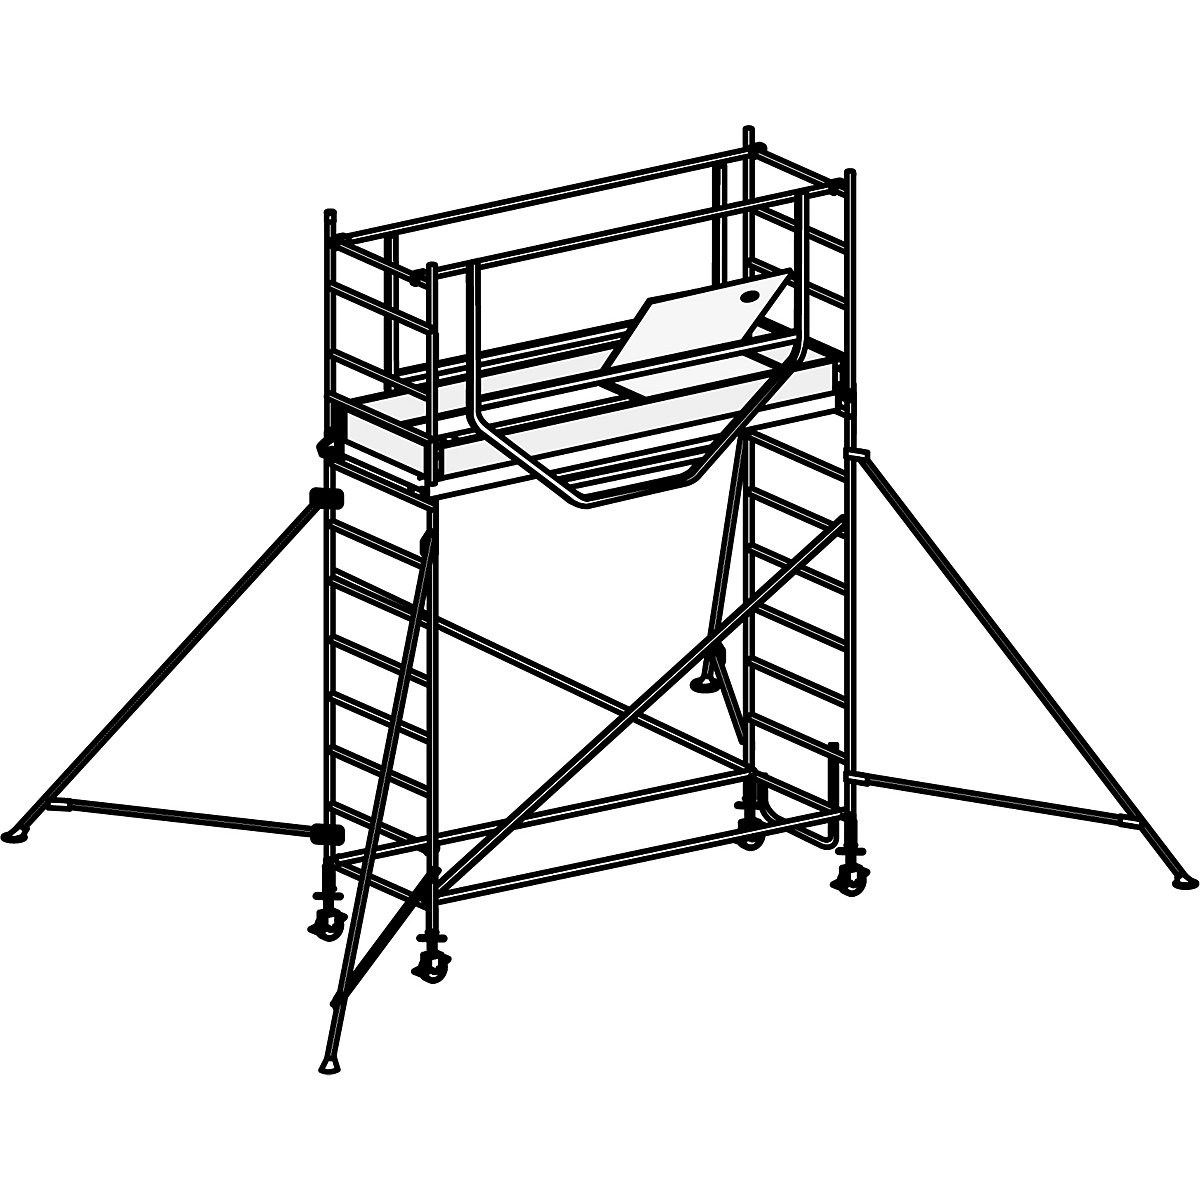 ADVANCED SAFE-T 7075 mobile access tower – HYMER, welded, platform 2.08 x 0.61 m, max. working height 4.25 m-19